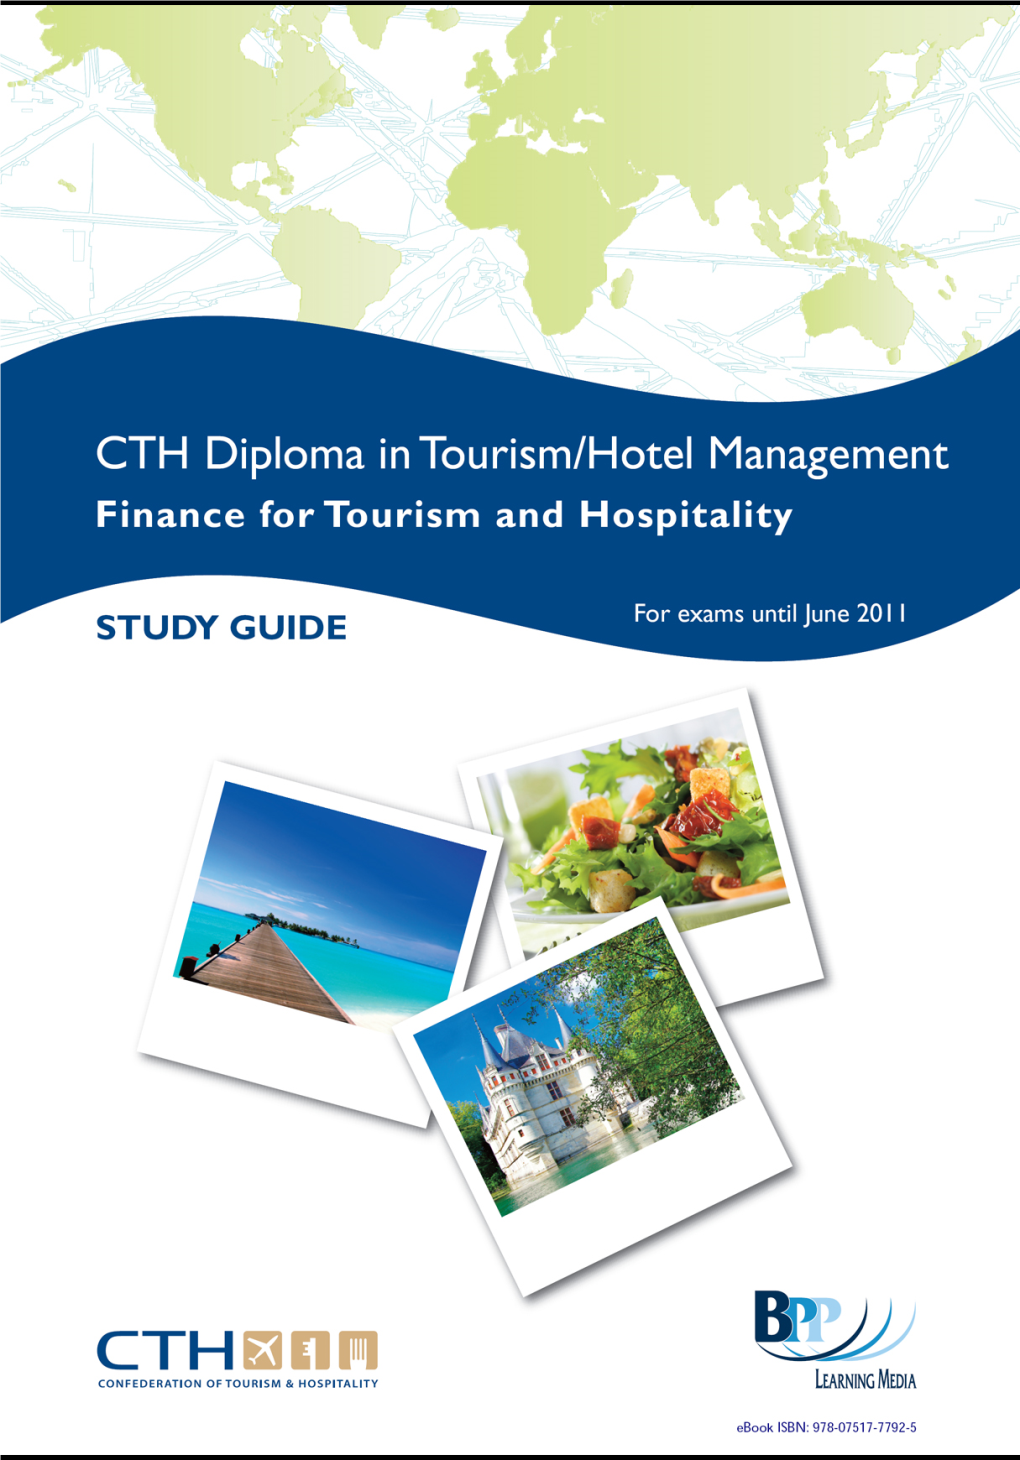 BPP Learning Media Is the Official Publisher for the CTH Diplomas in Hotel Management and Tourism Management